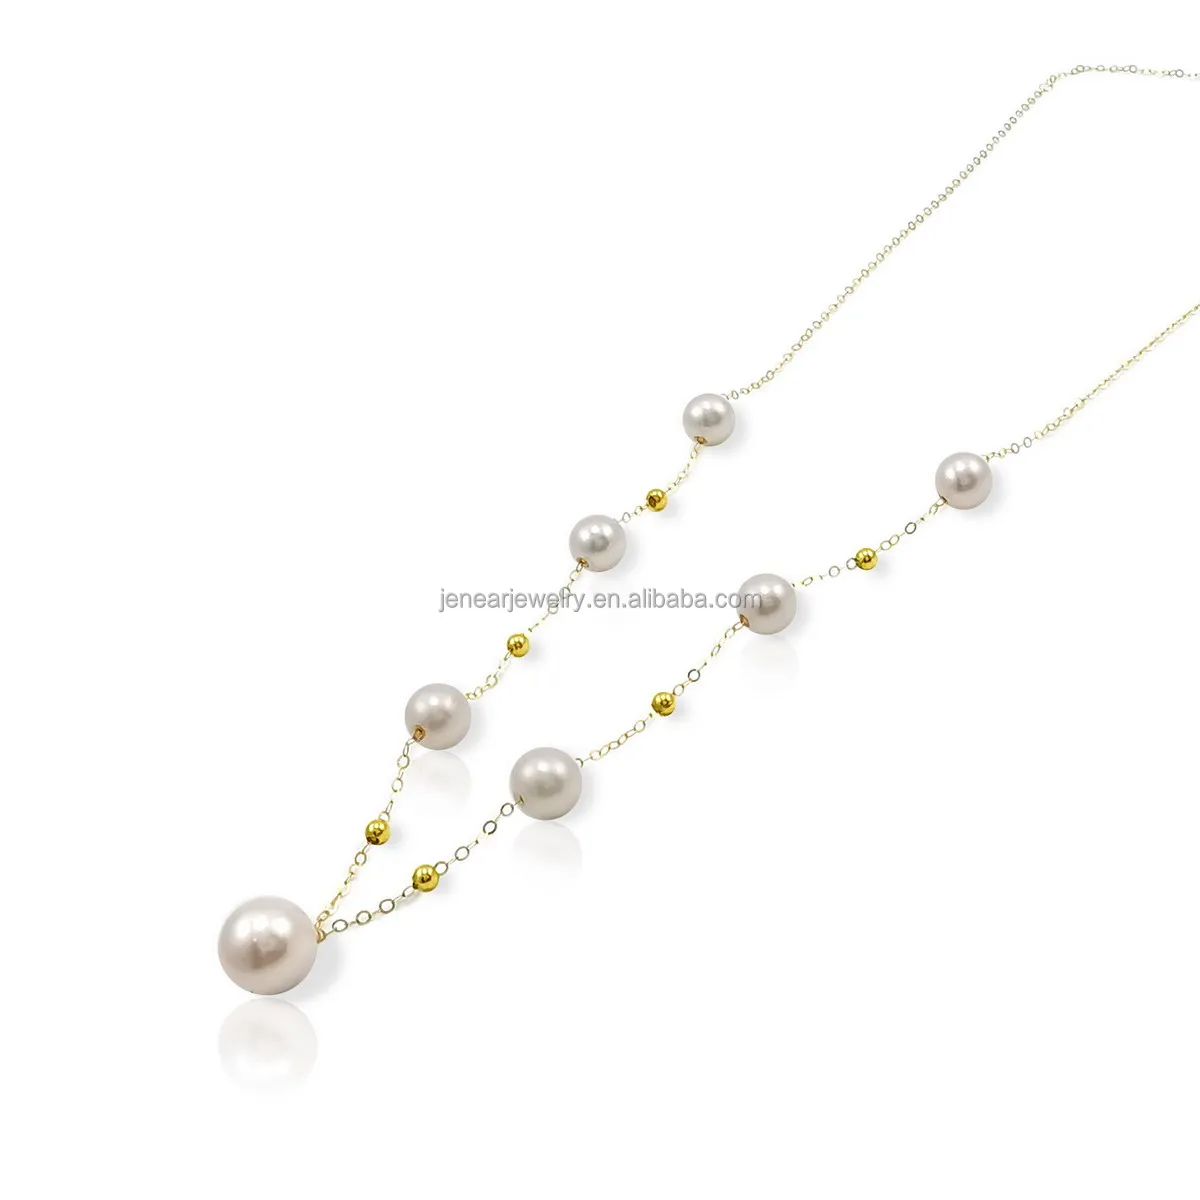 

Genuine pearl necklace real solid gold 18K AU750 gold natural freshwater pearls pawnable gold necklace